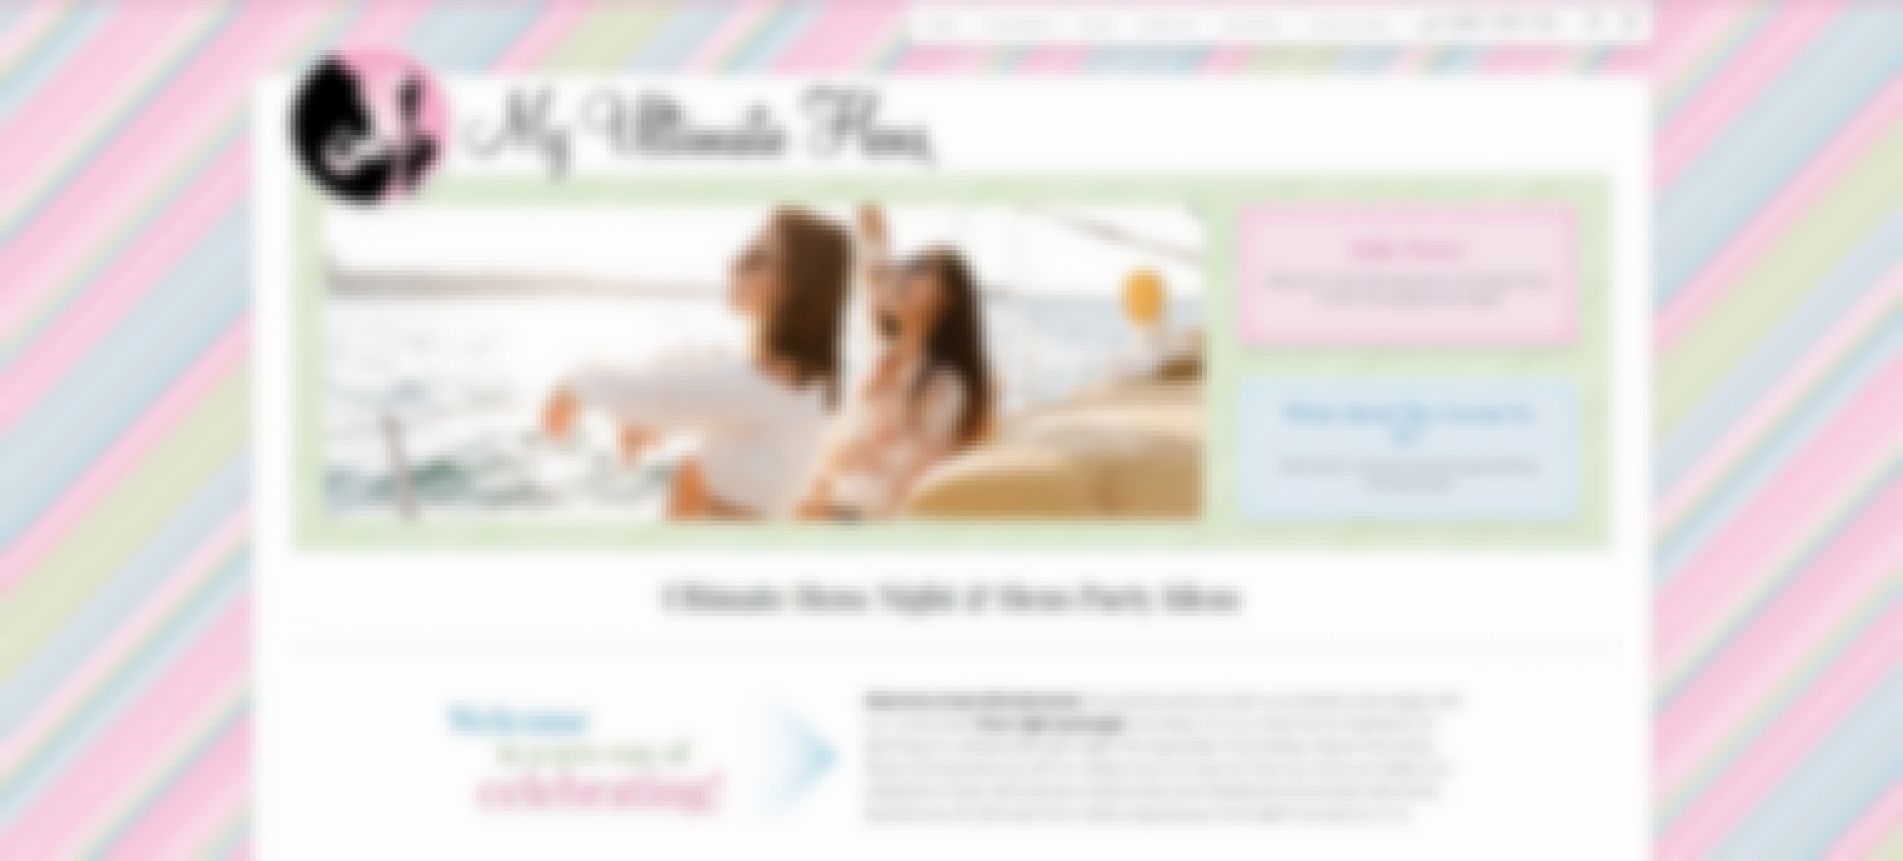 my ultimate hens party ideas melbourne